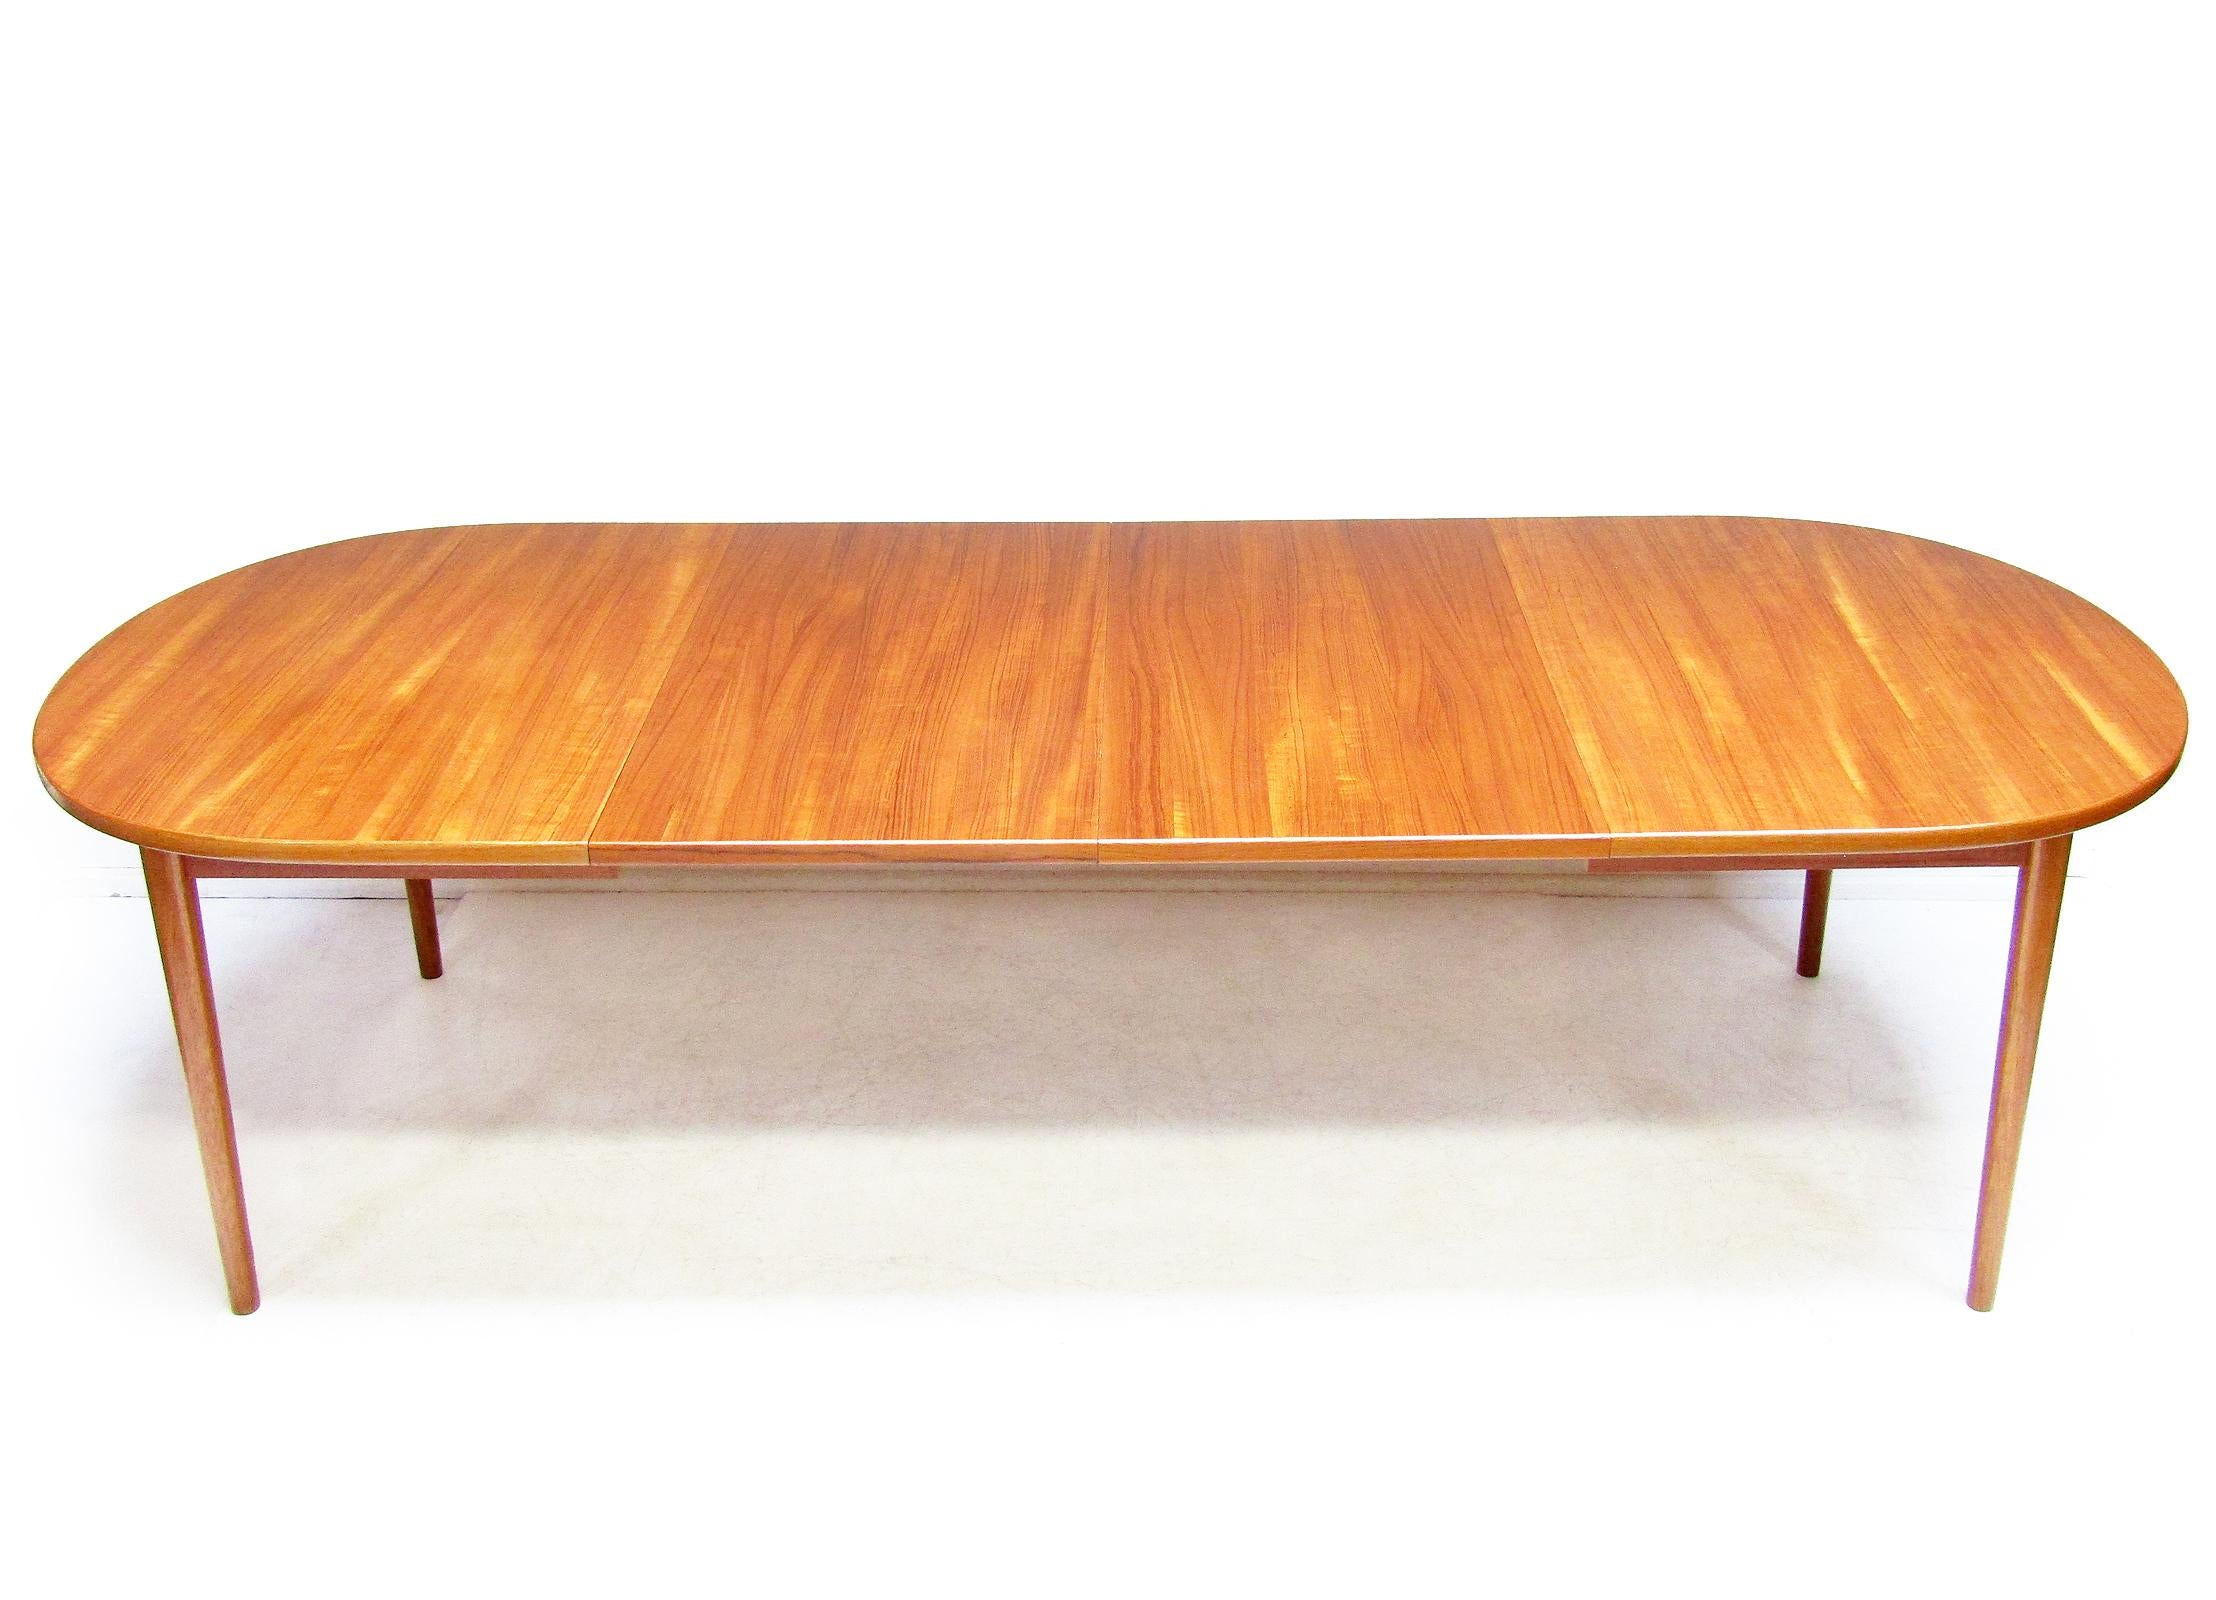 A beautiful 1960s extending dining table in teak by Swedish designer Nils Jonsson for Hugo Troeds.

In excellent restored condition it extends up to 265cm, seating up to fourteen diners.

The extension leaves can be neatly concealed within the